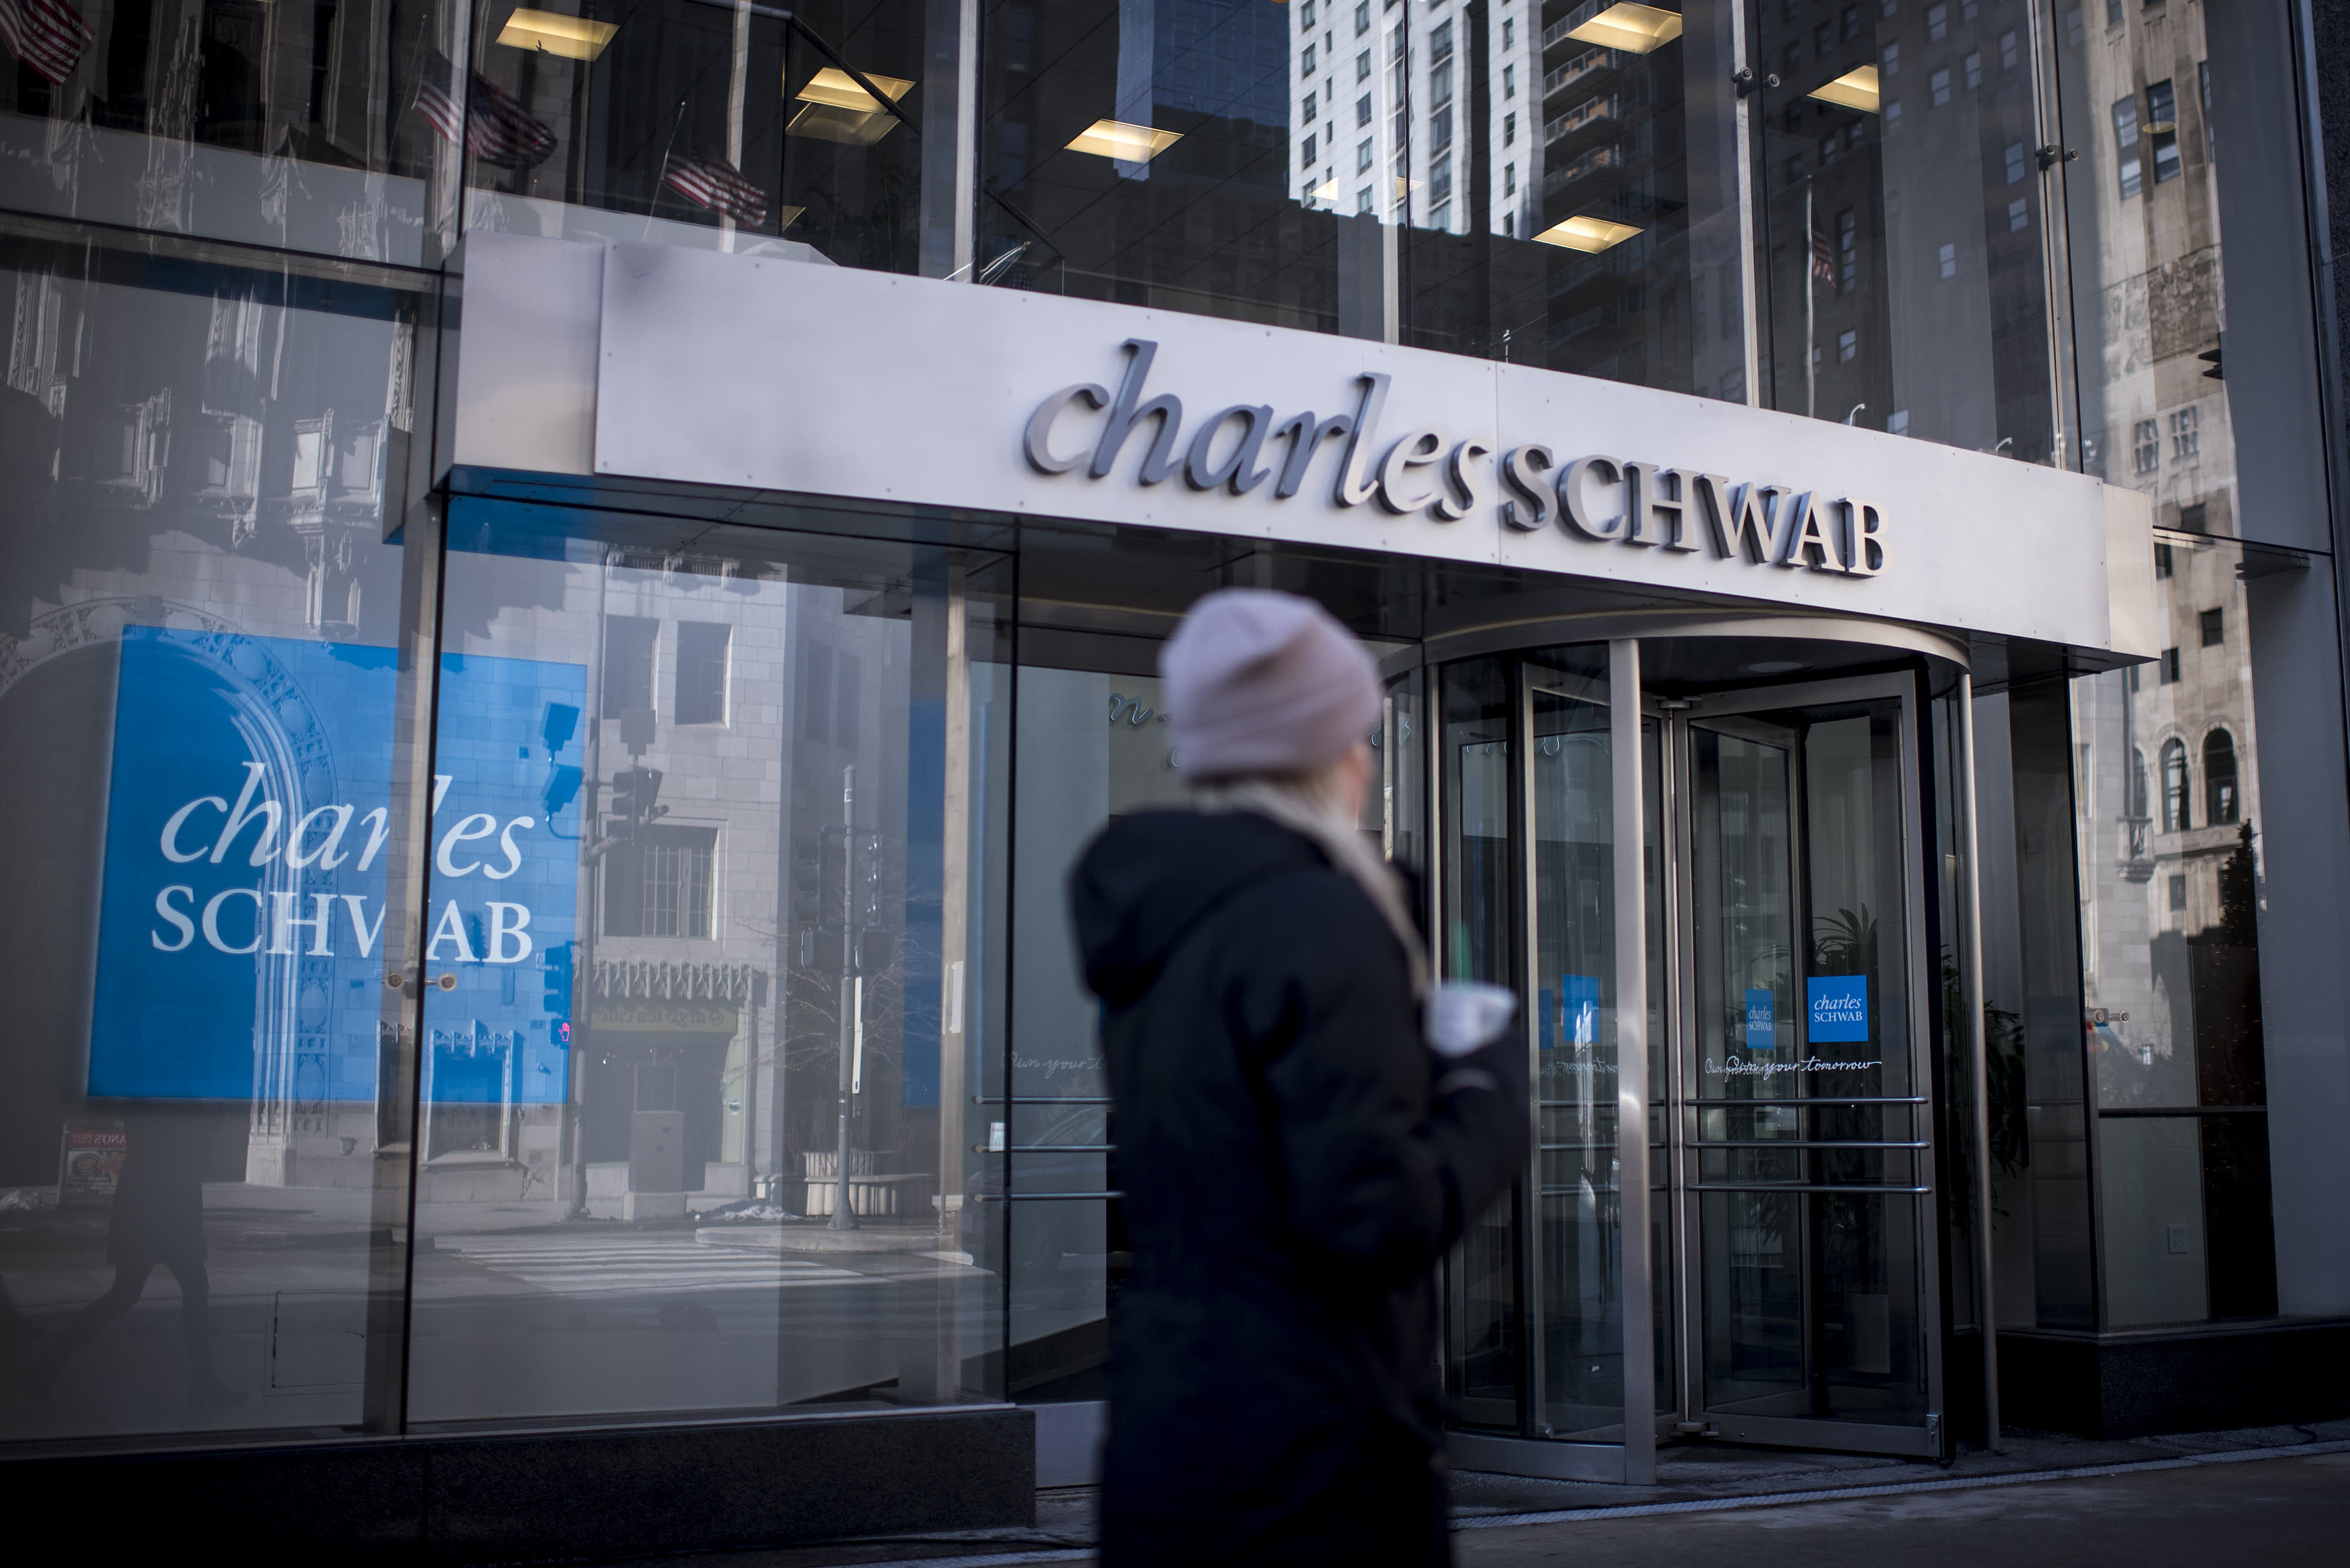 Charles Schwab to give most employees 5 raise for pandemic work